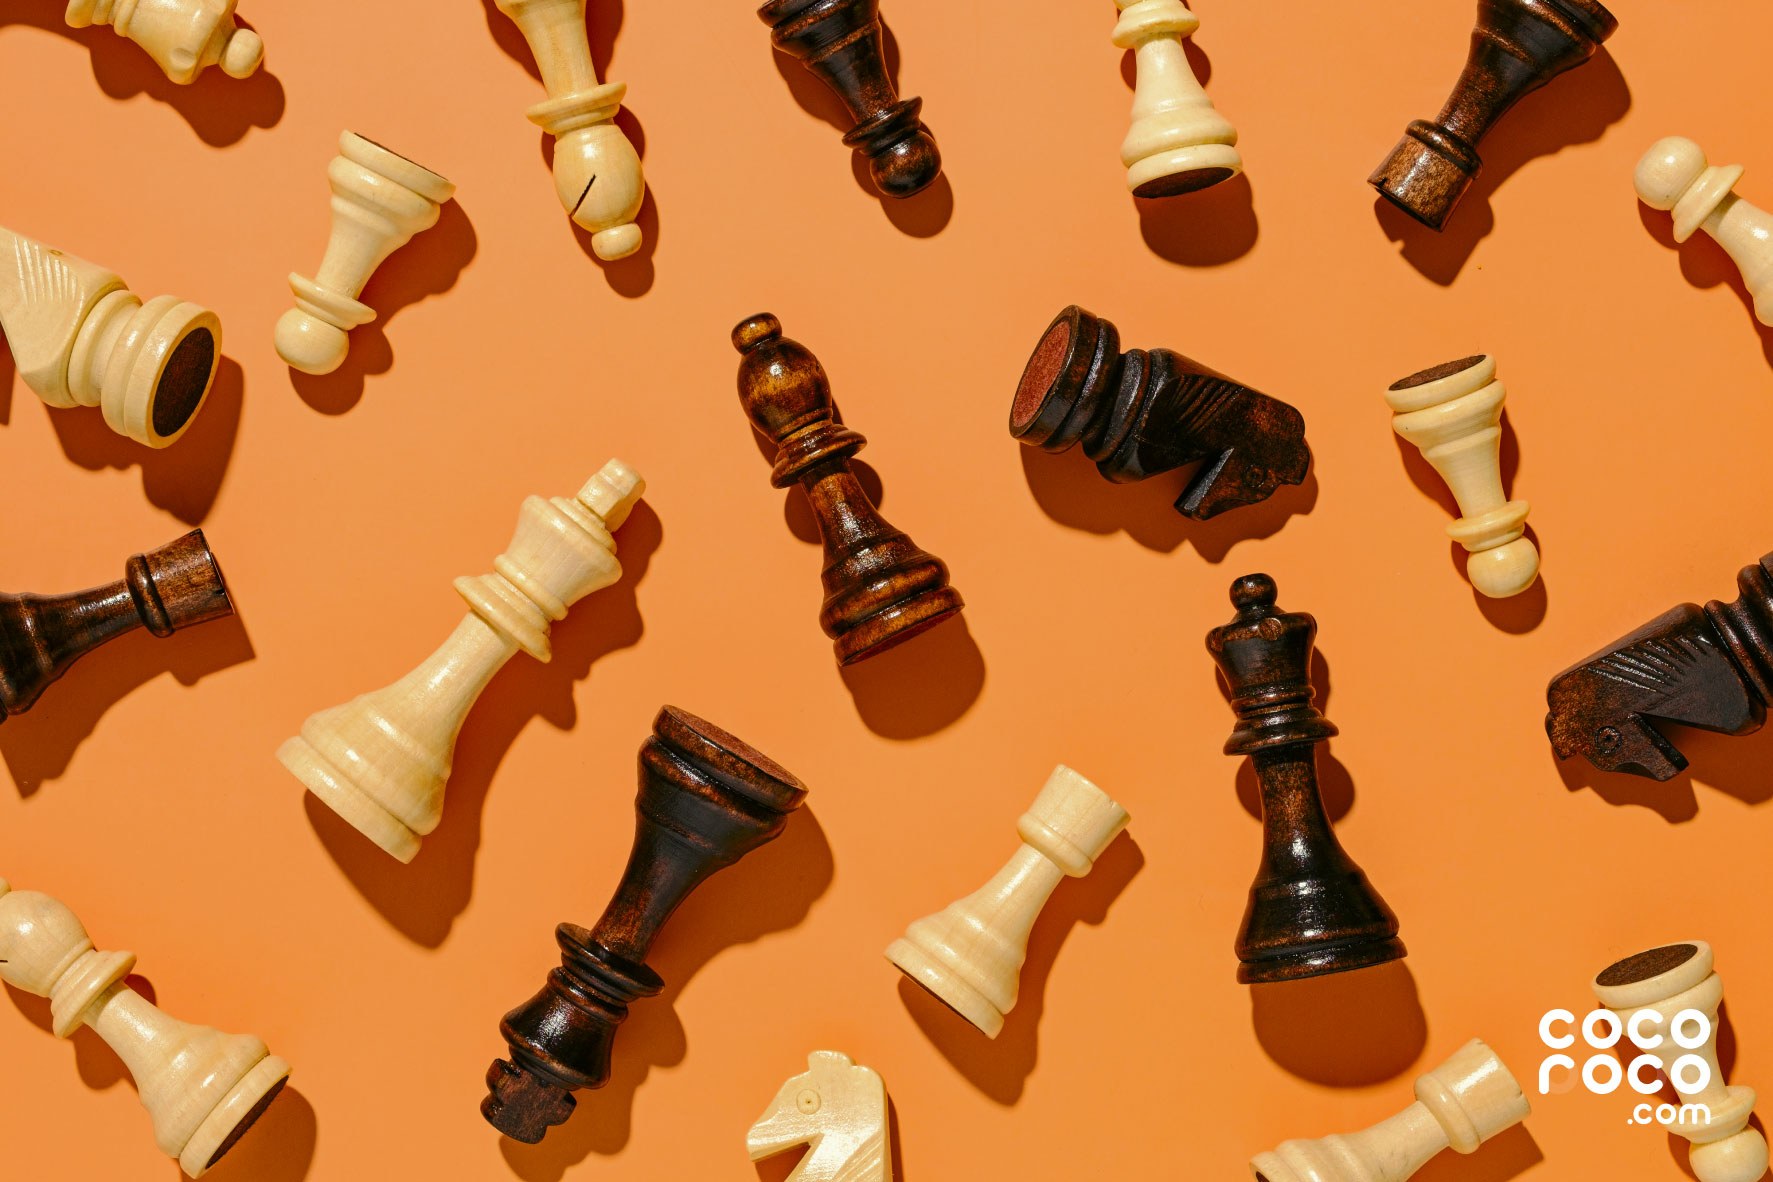 An image of chess pieces with an orange background